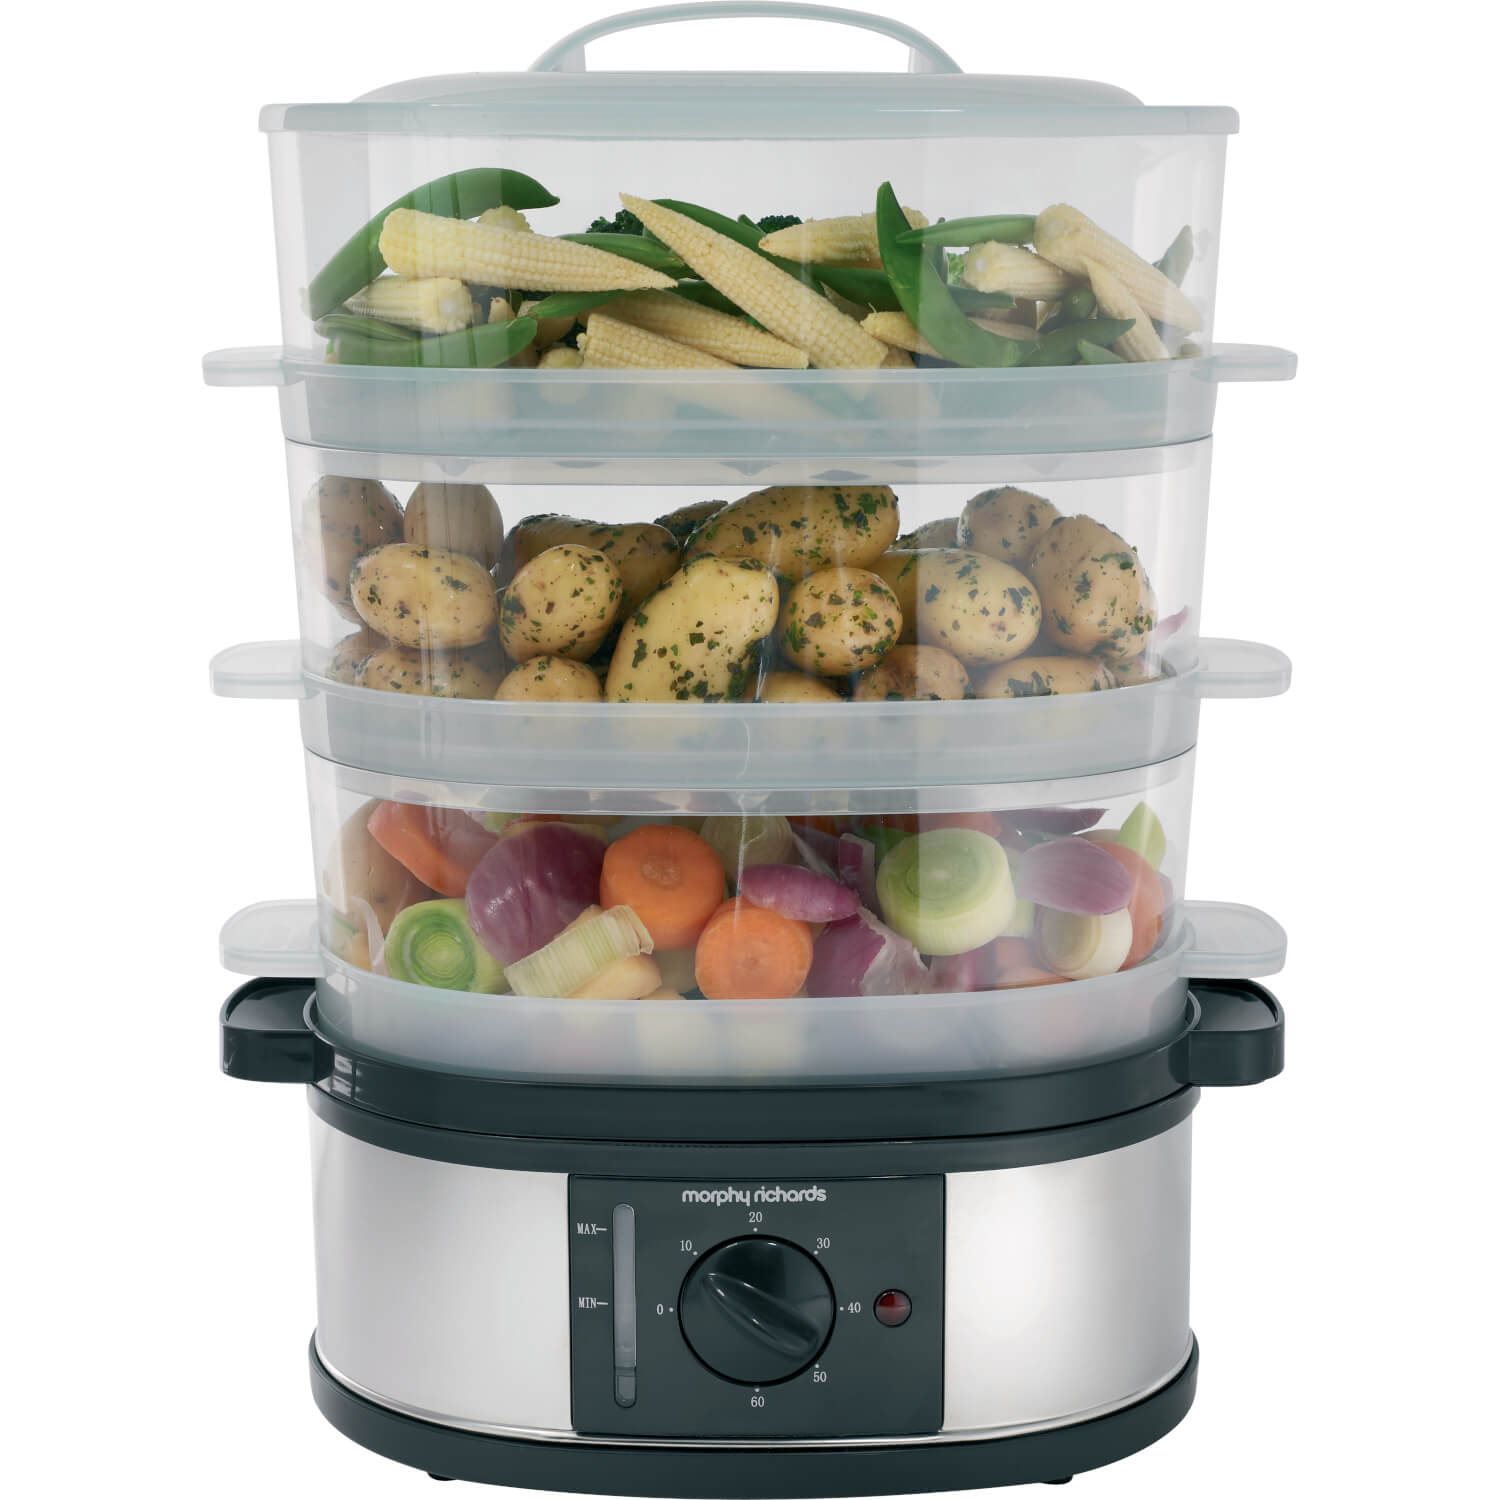 Morphy Richards 3-Tier Food Steamer - 9L - Steel | 48755 1 Shaws Department Stores